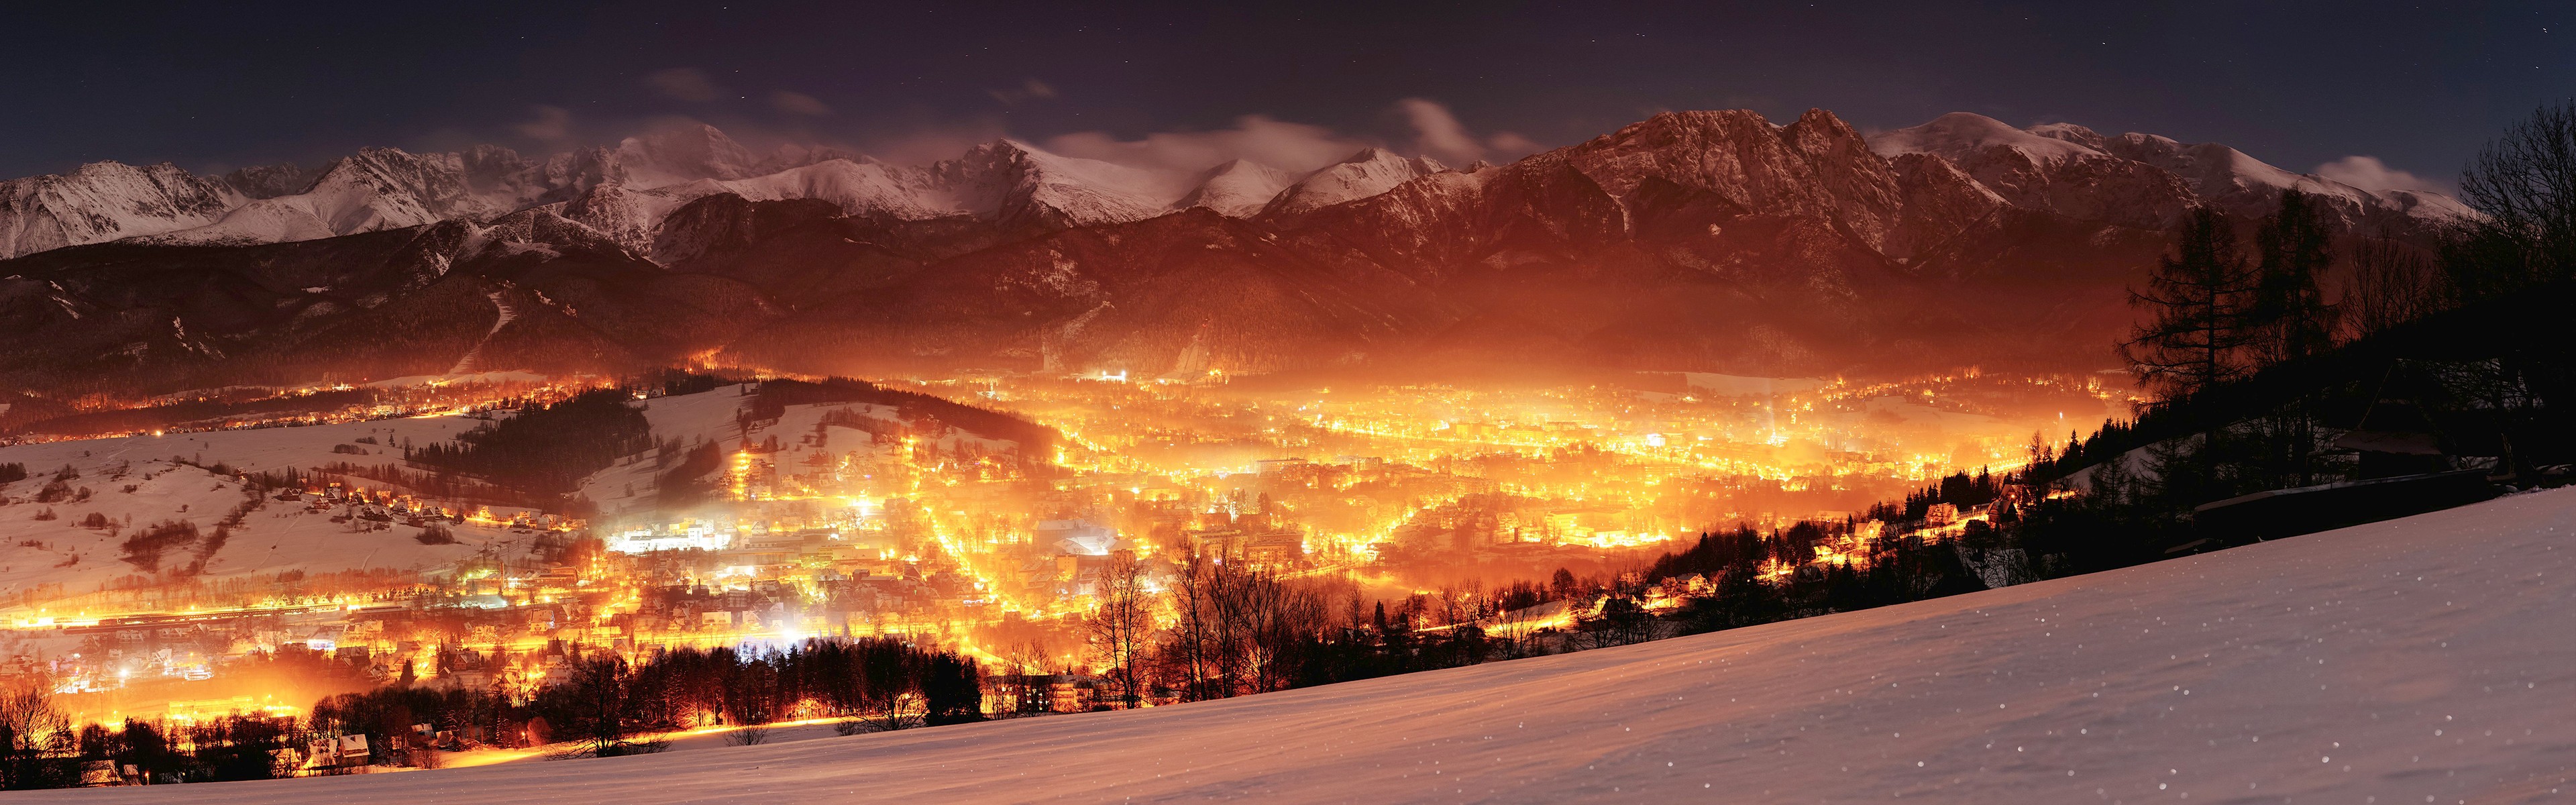 General 3840x1200 Poland landscape mountains valley lights glowing winter multiple display night dual monitors city lights snowy peak snowy mountain cold ice snow outdoors nature